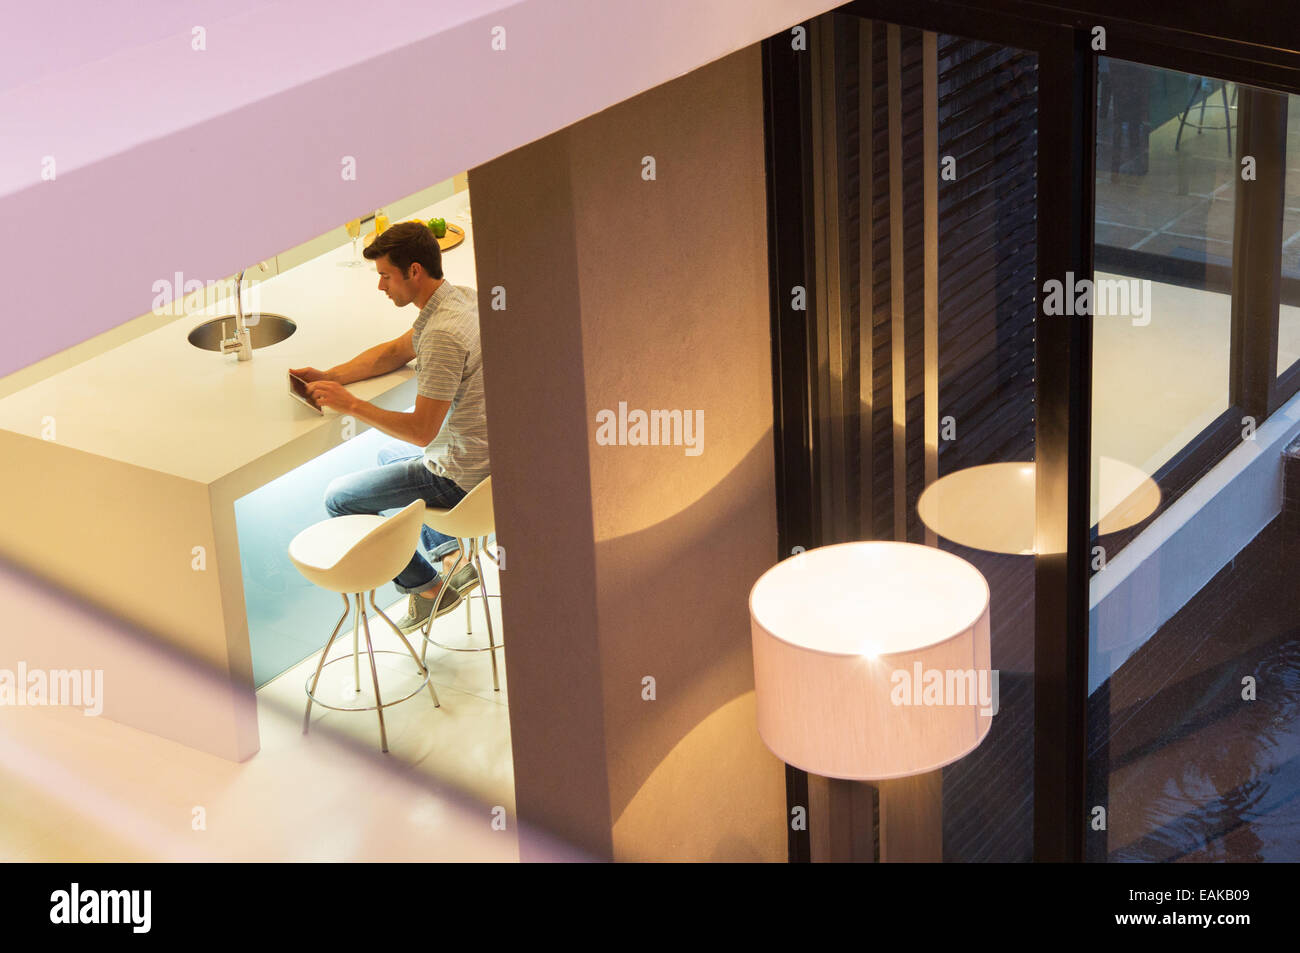 Elevated view of man using tablet pc in kitchen at night Stock Photo